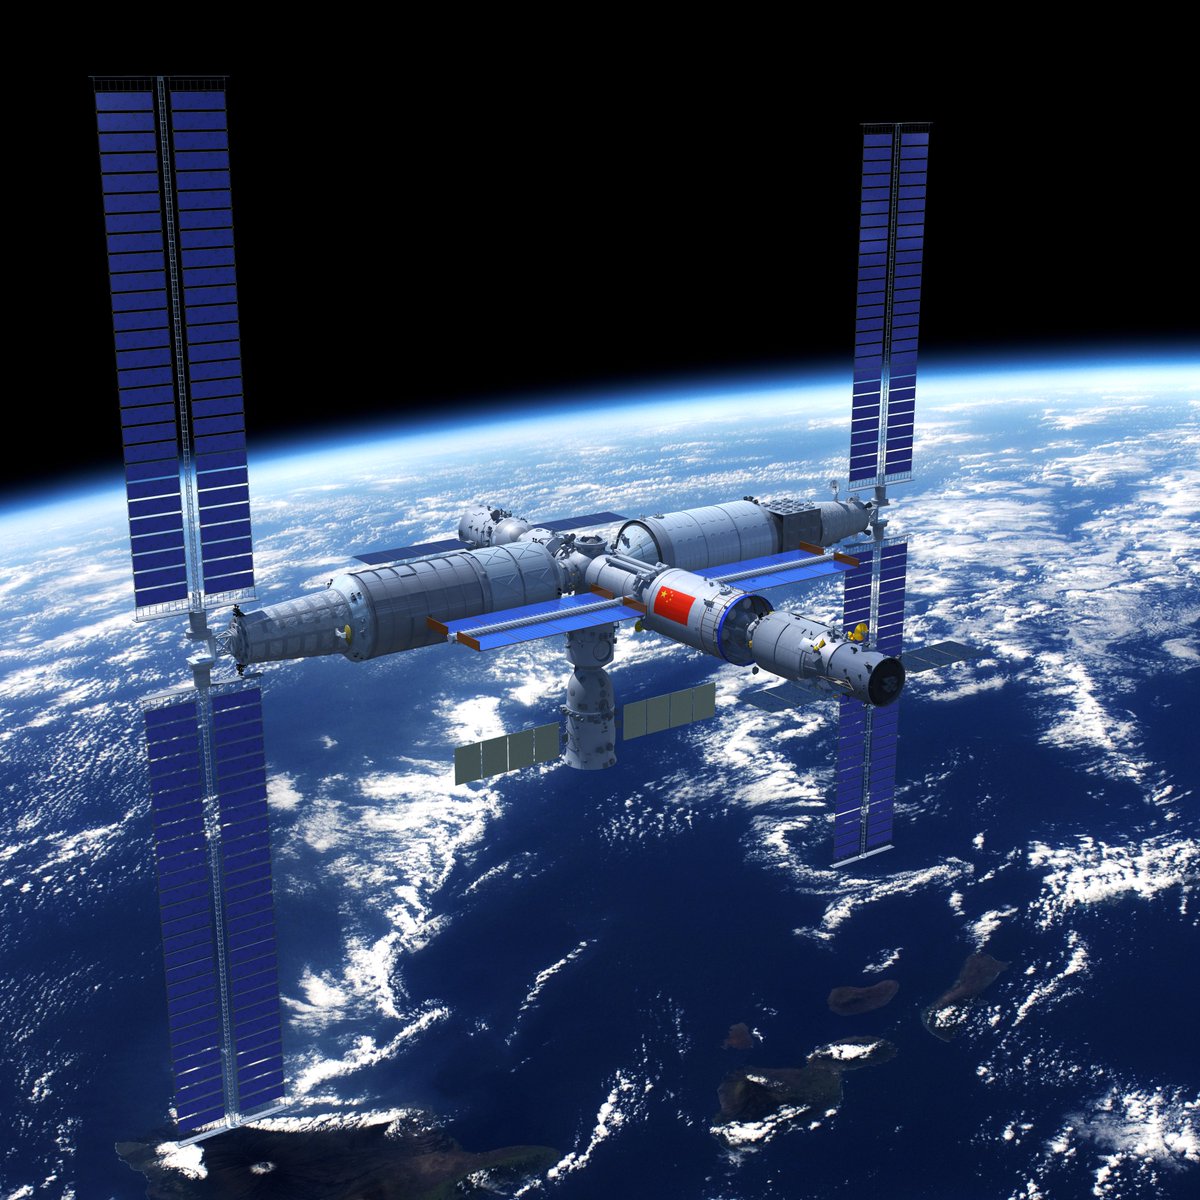 Press release: United Nations and China invite applications to conduct experiments on-board China's Space Station. bit.ly/2xtp0dc